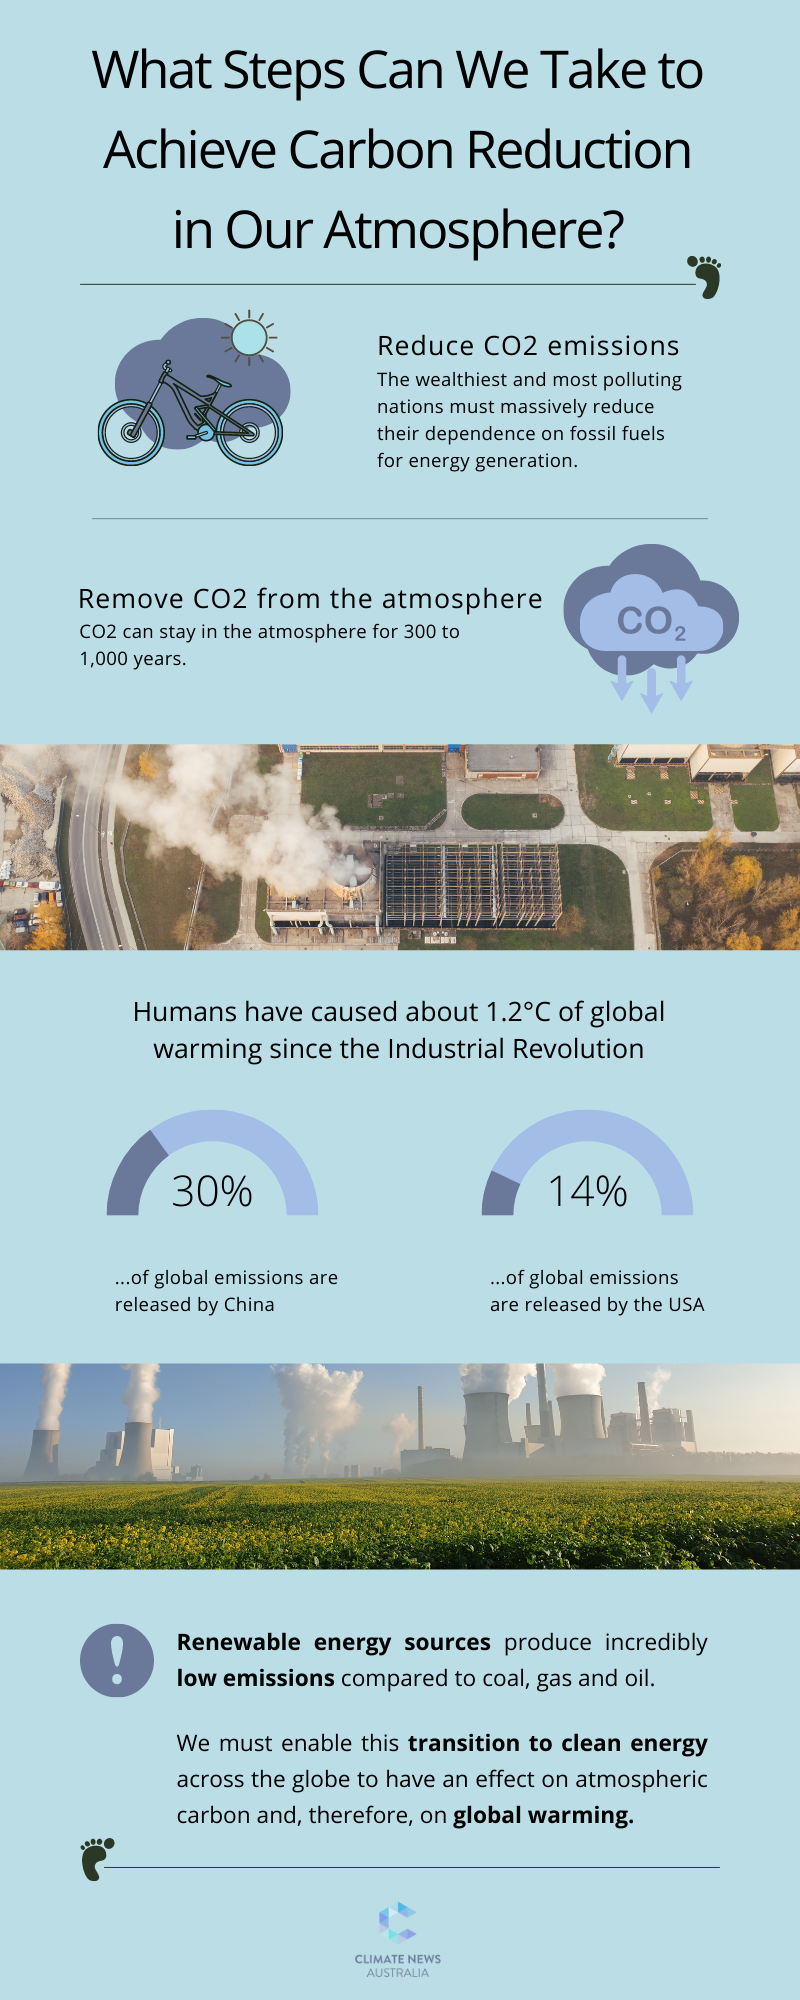 What Steps Can We Take to Achieve Carbon Reduction in Our Atmosphere